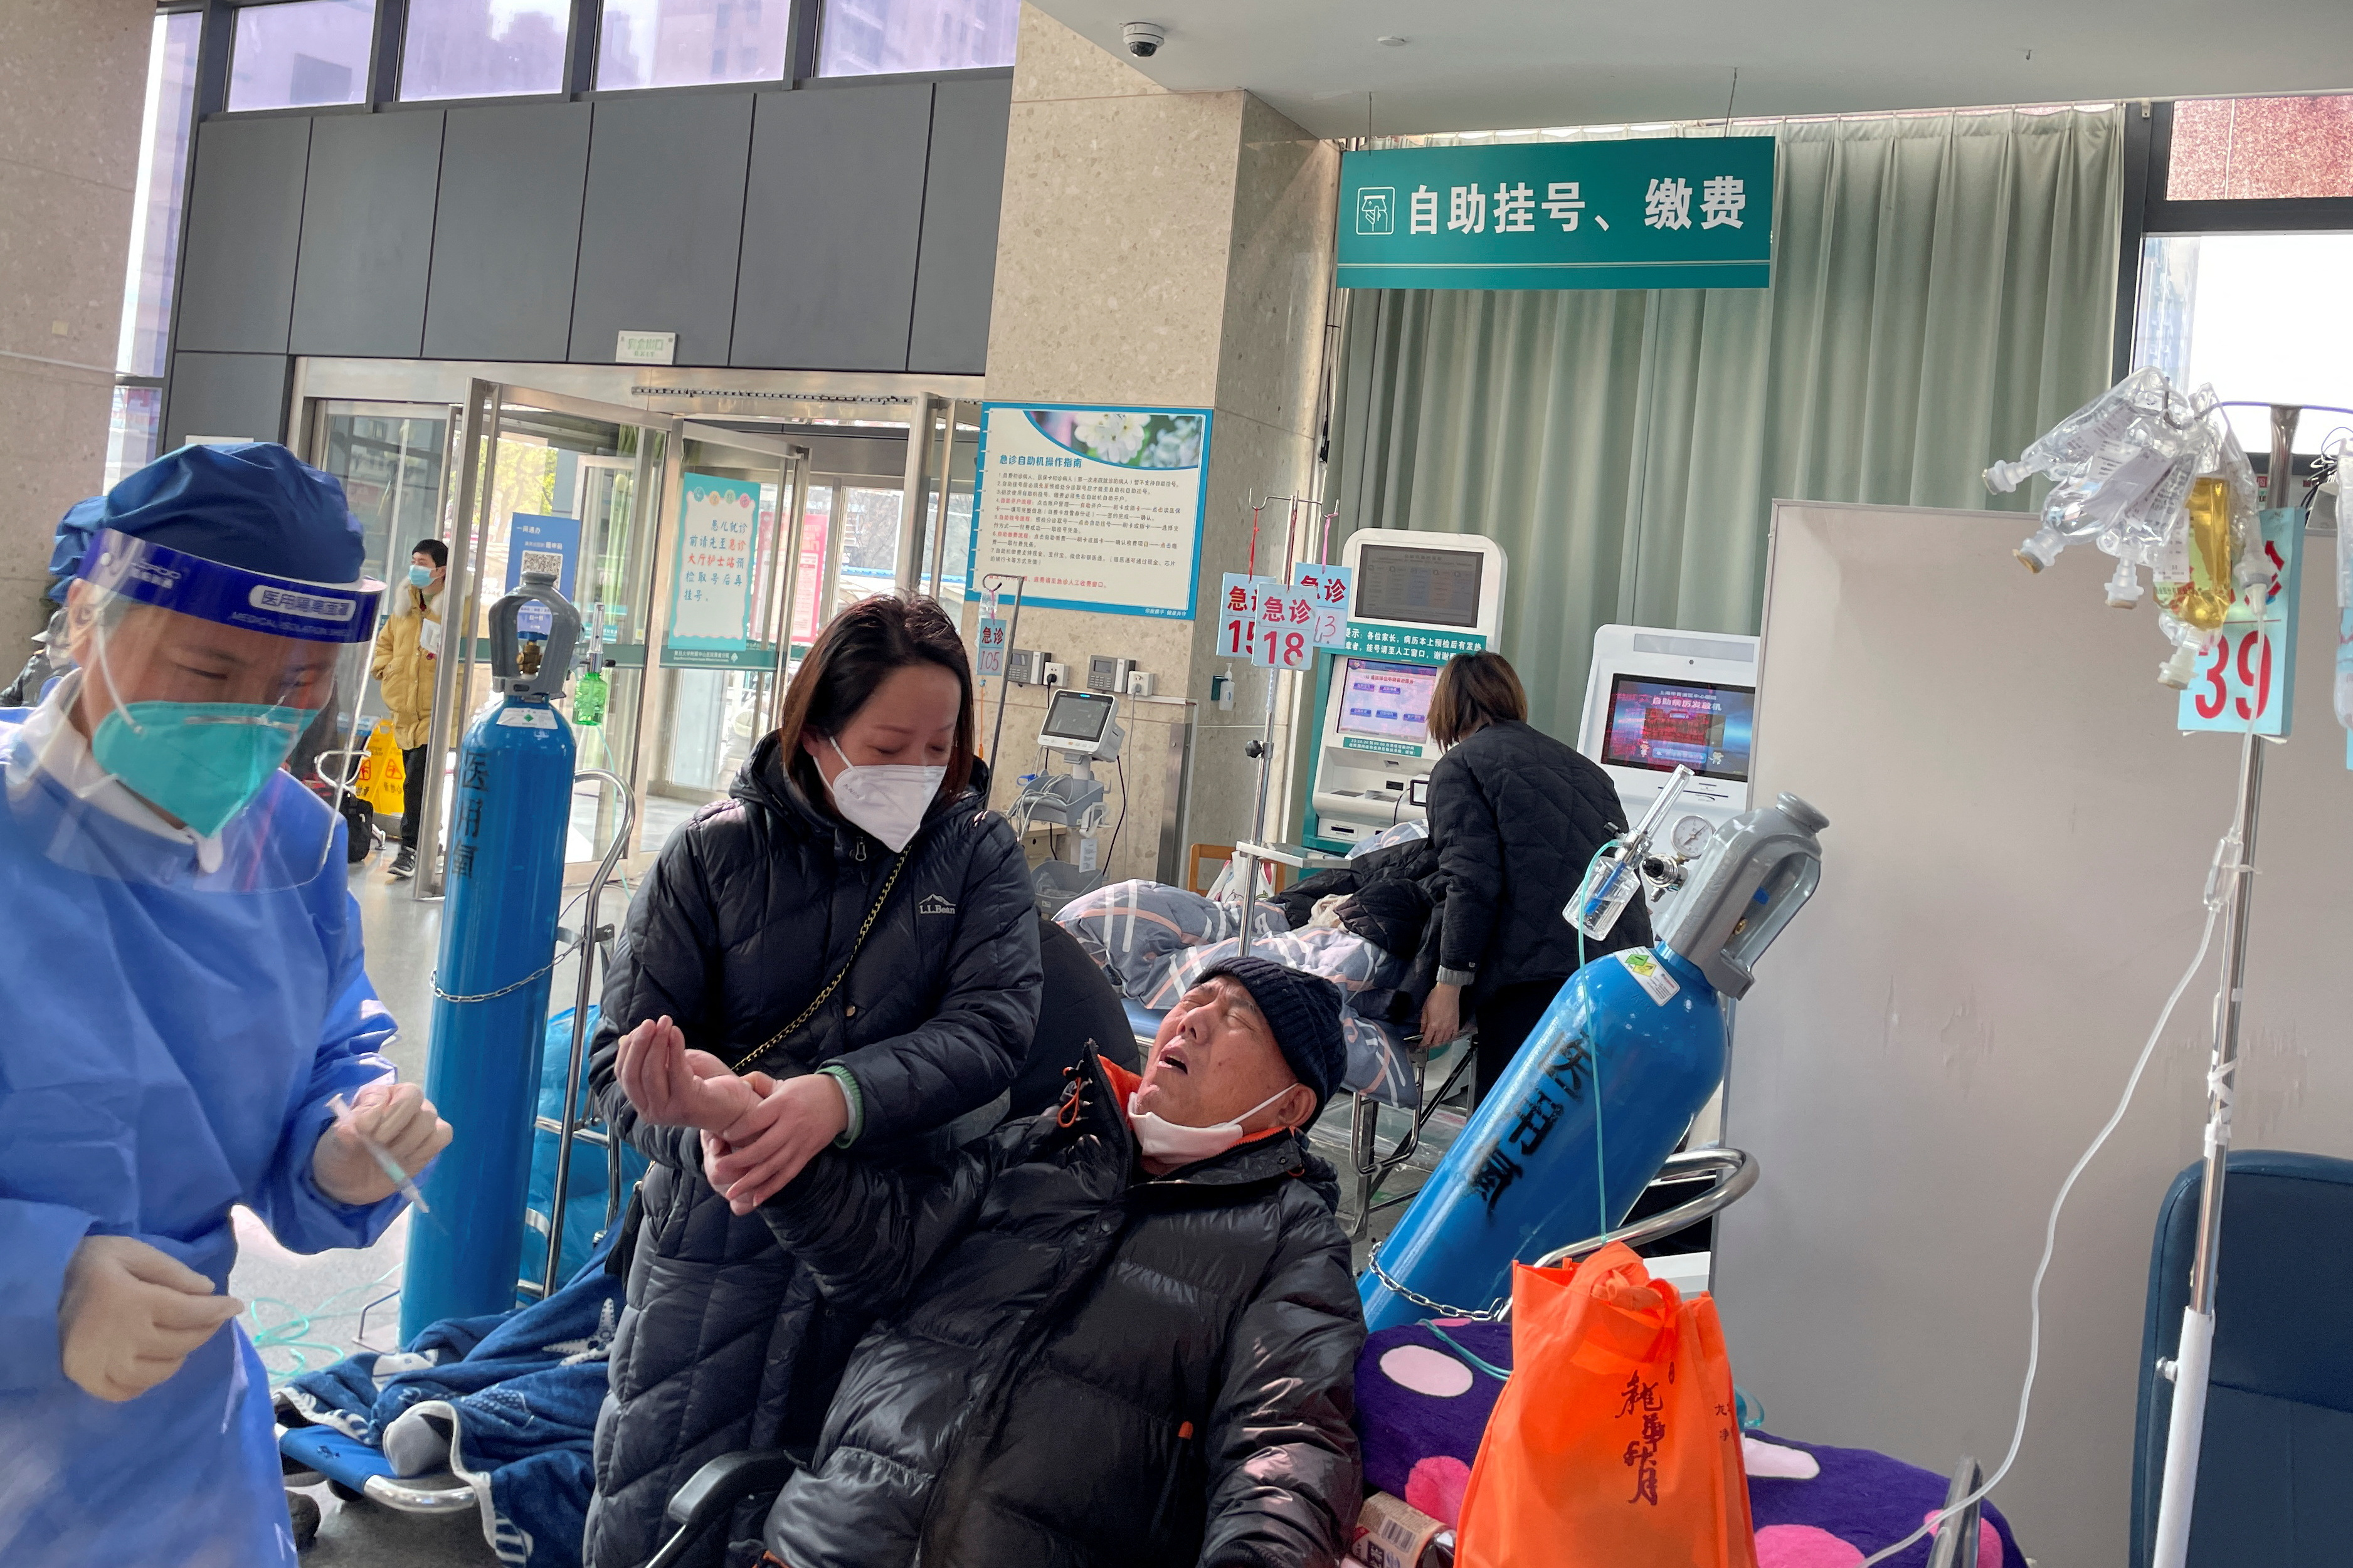 A patient receives treatment at a hospital emergency department amid the coronavirus disease (COVID-19) outbreak in China